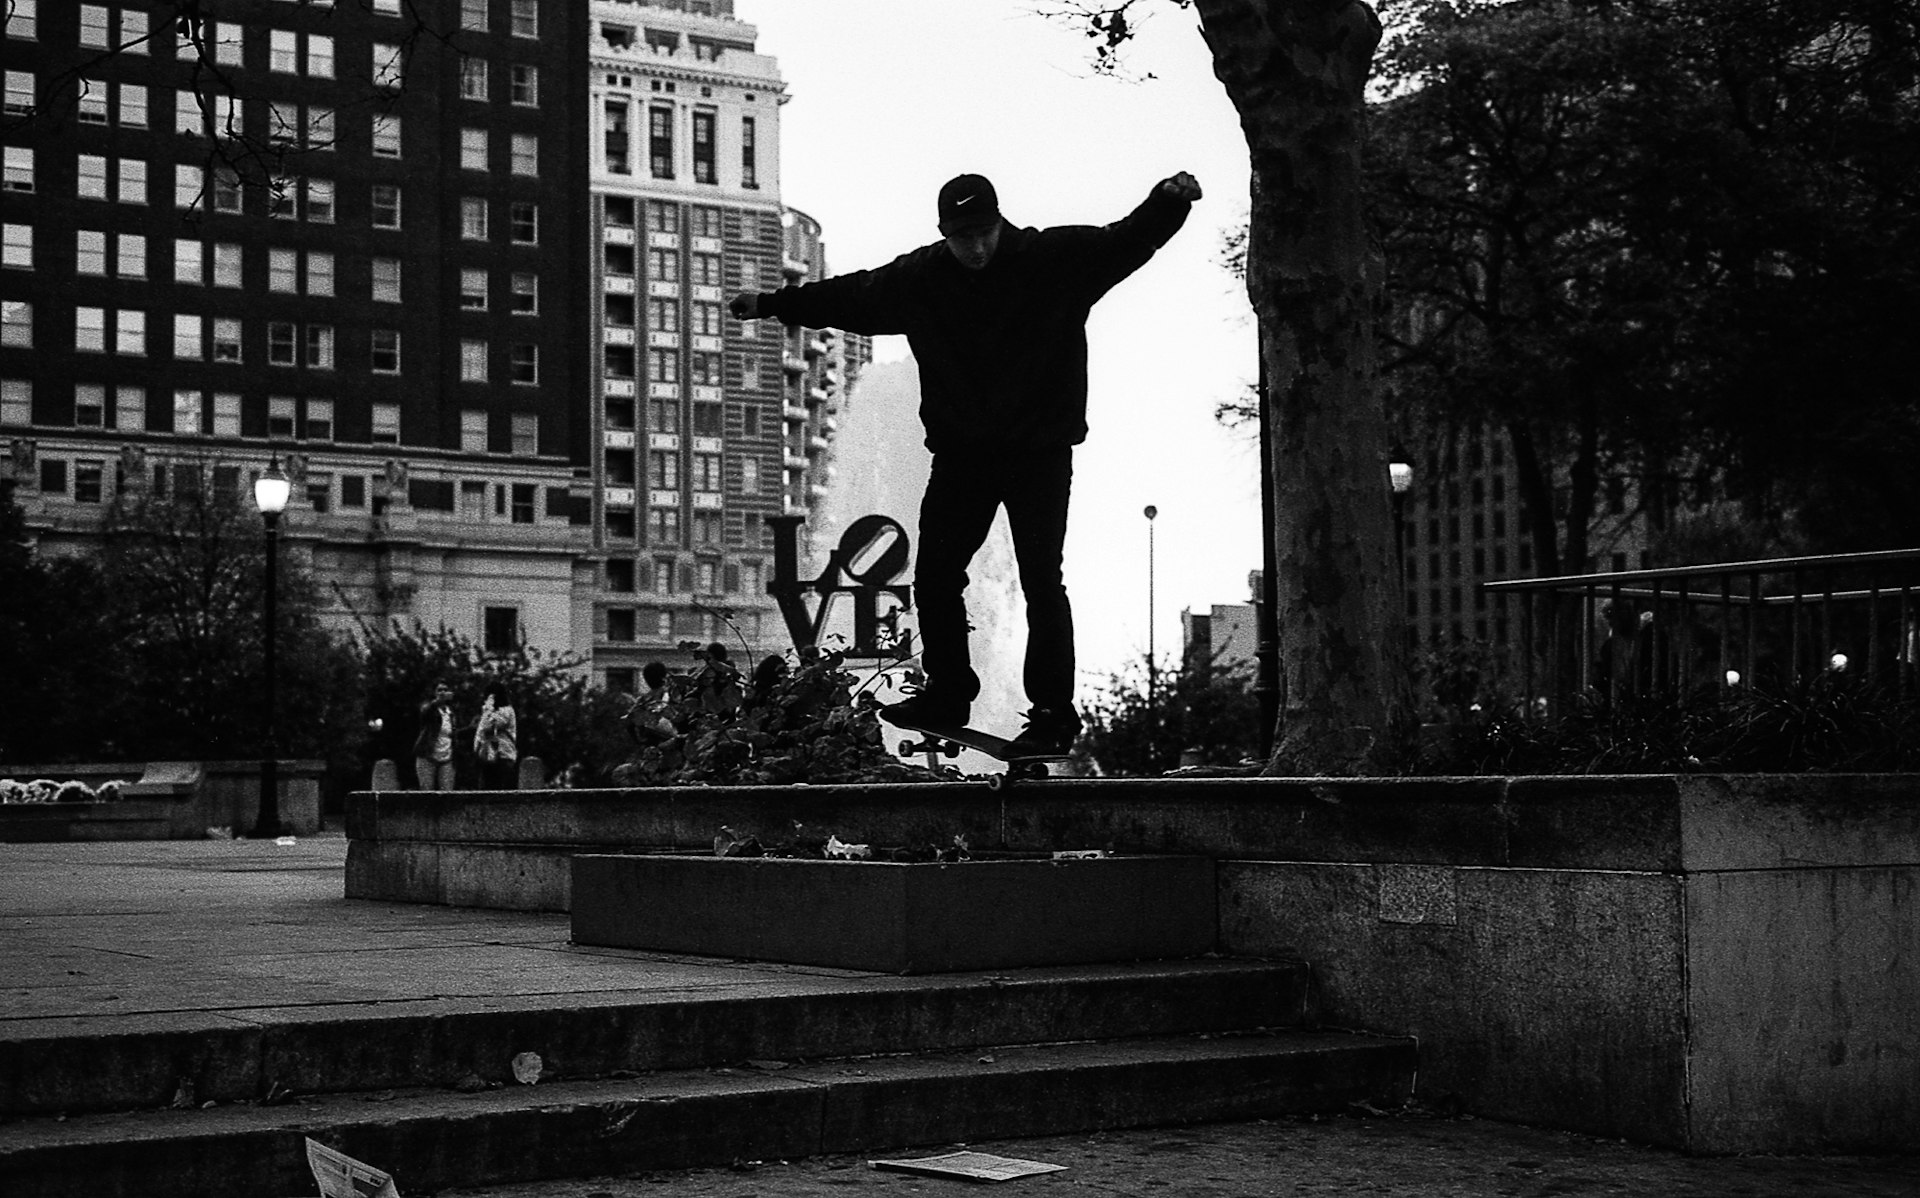 Documenting the final days of Philly’s legendary LOVE Park